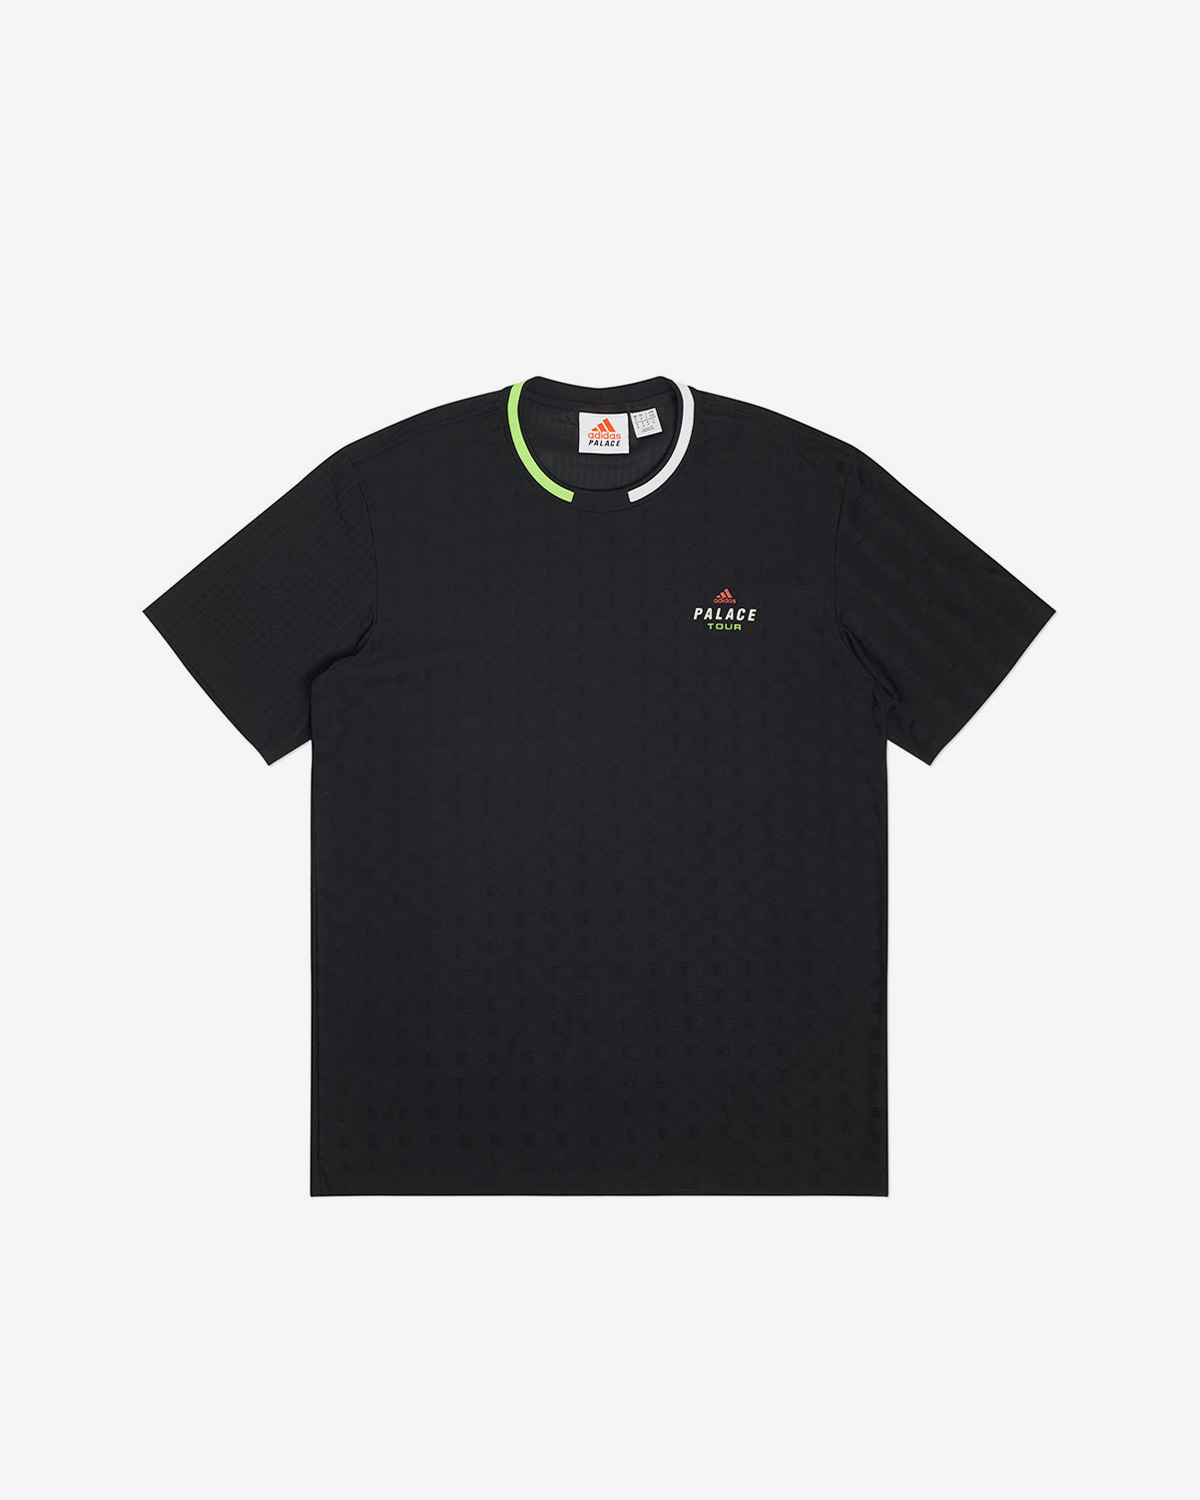 palace-adidas-golf-collaboration-official-look-01